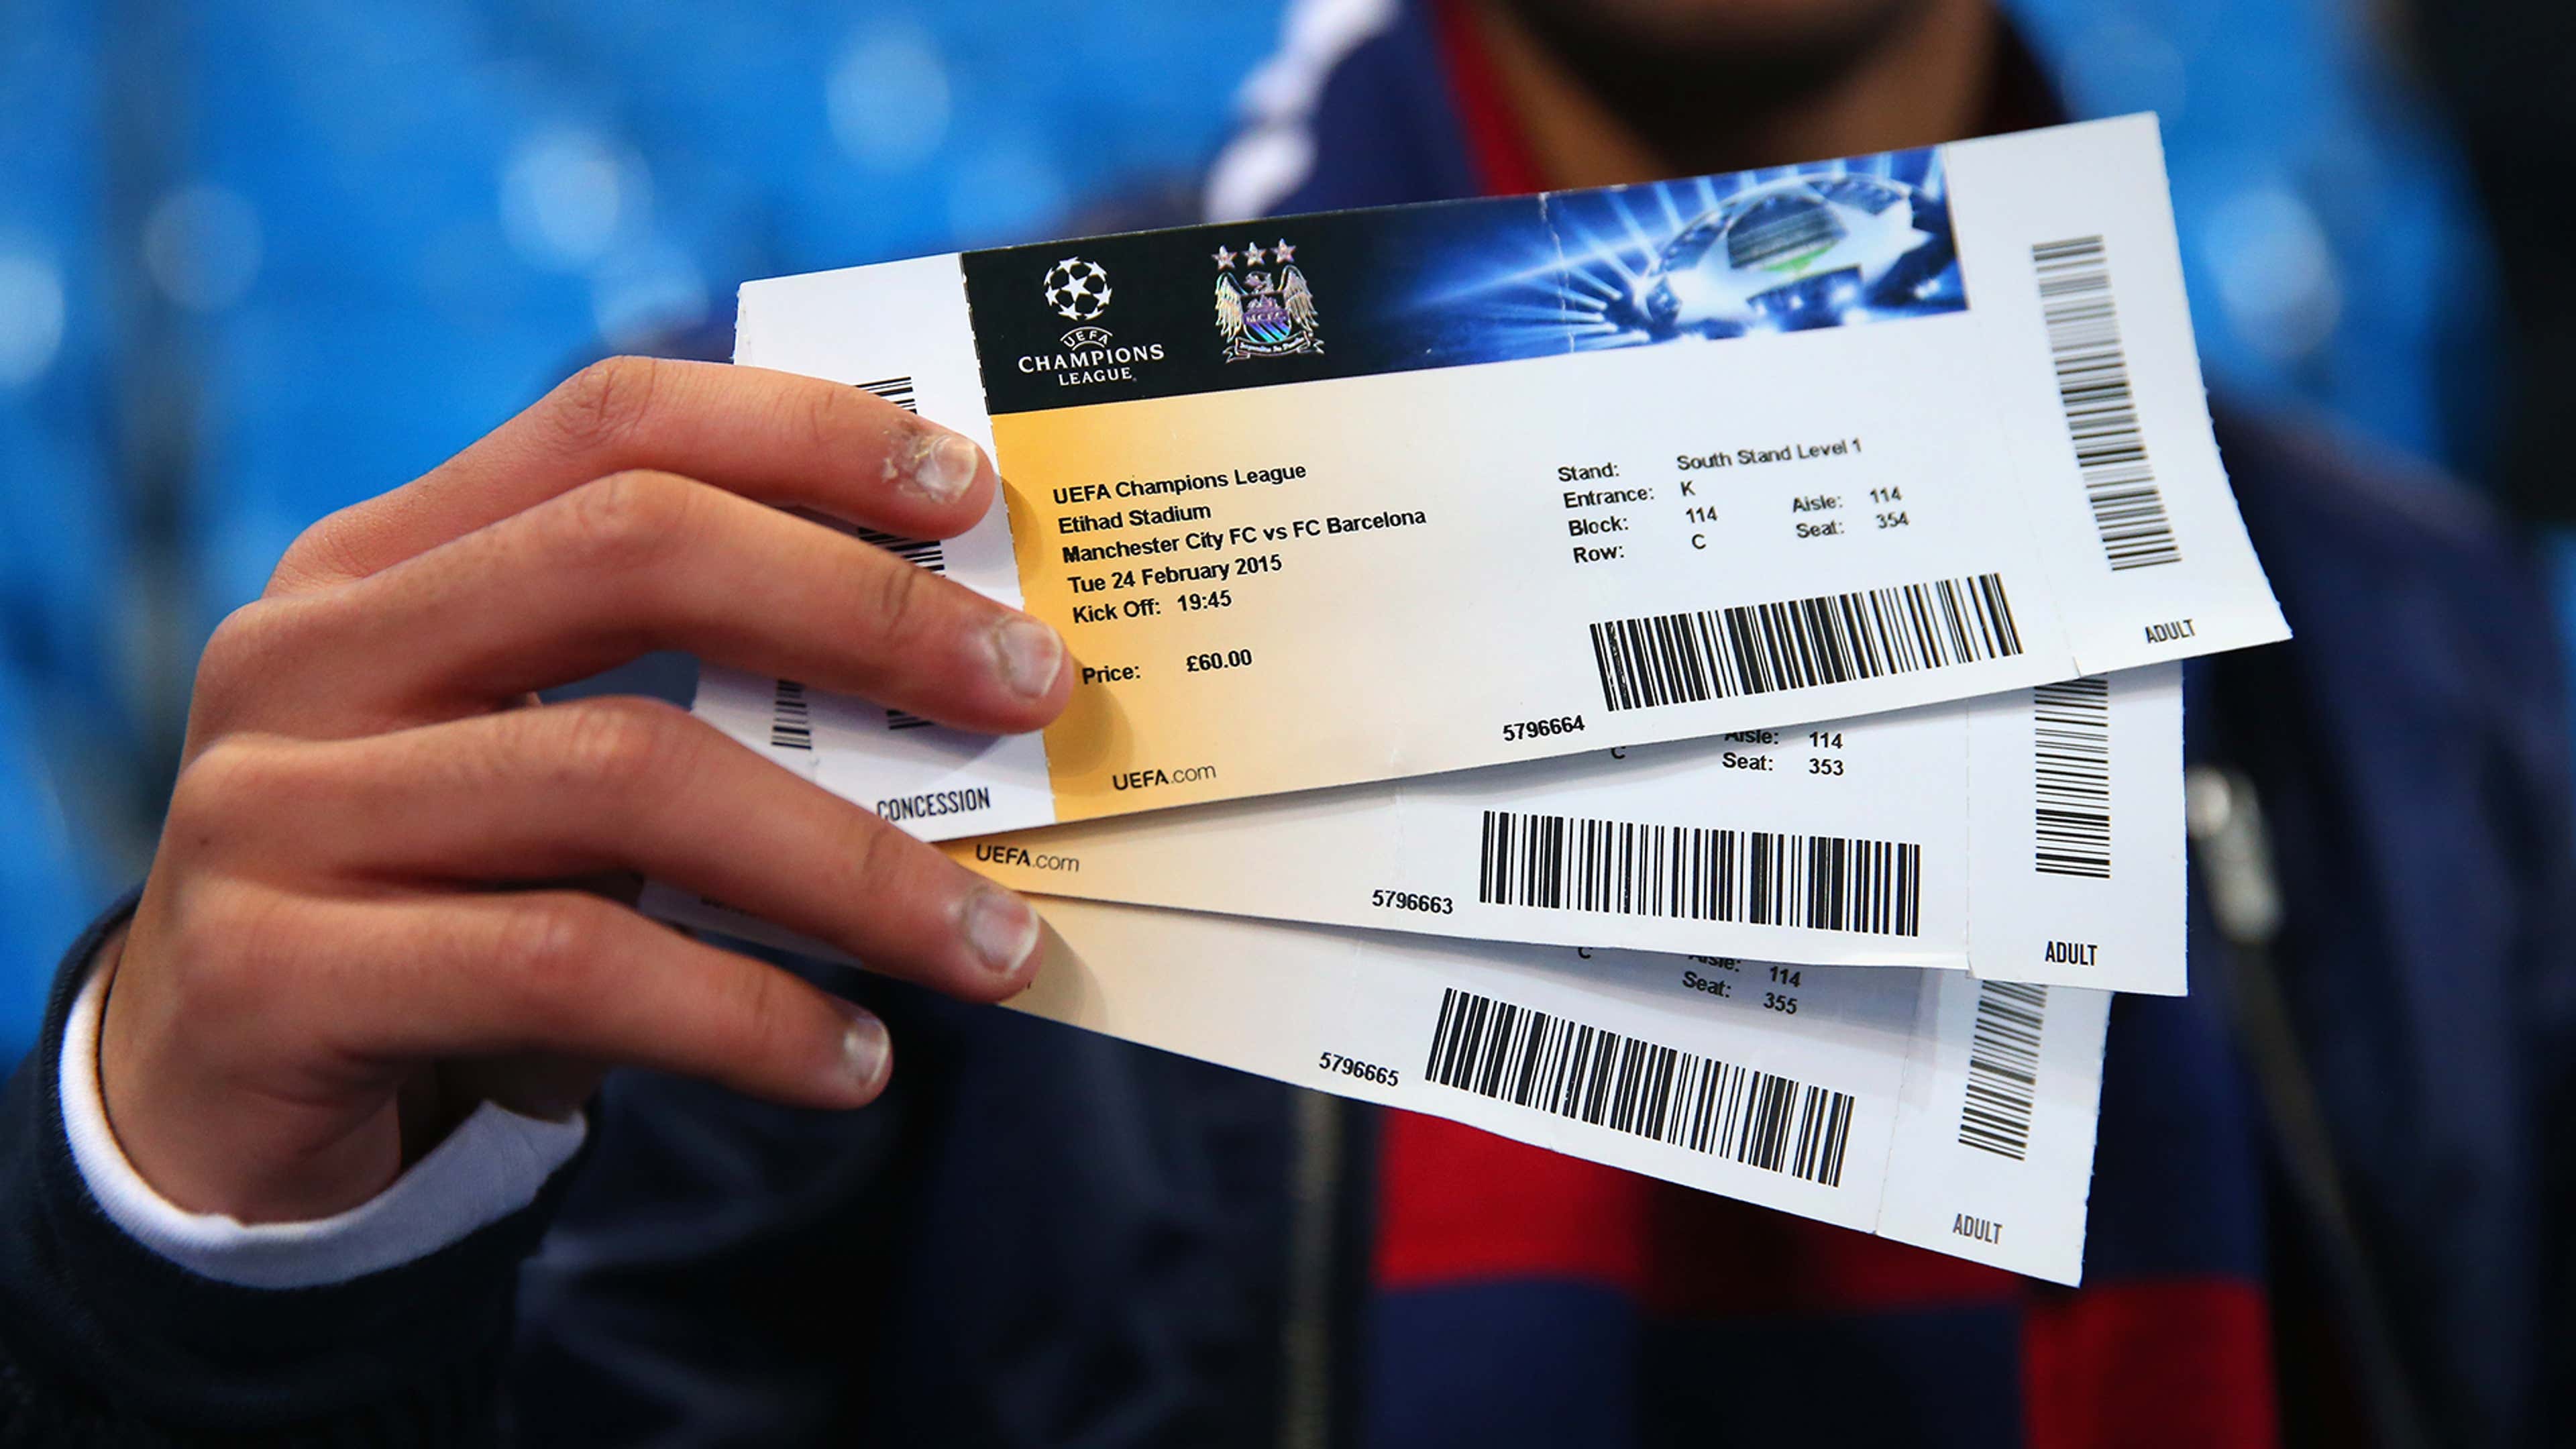 Top list and relevant documents of query tickets for UEFA Champions